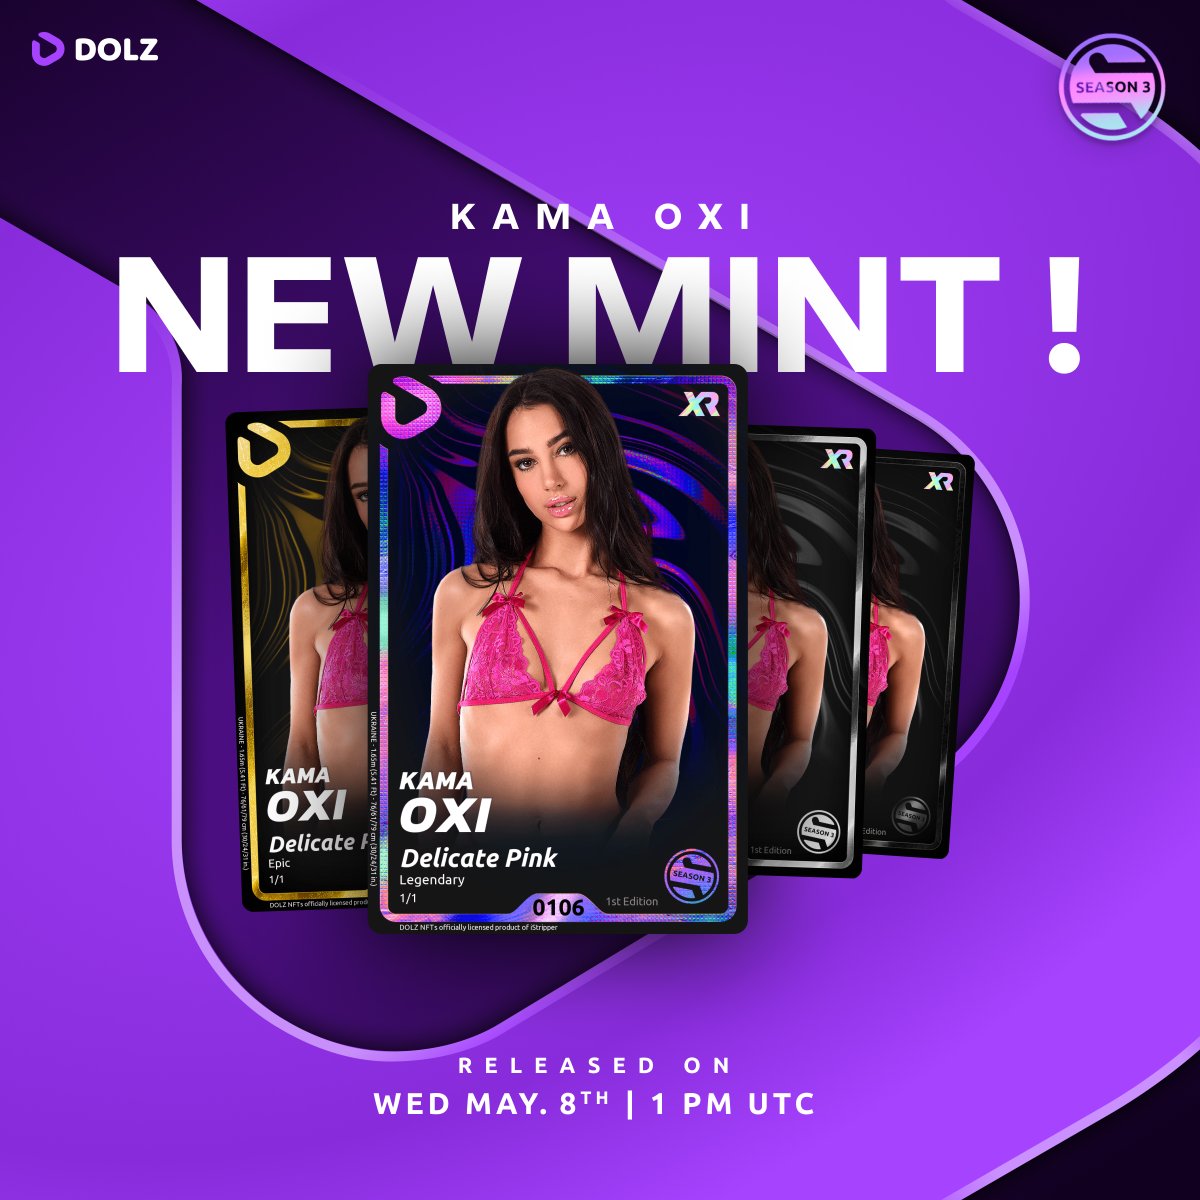 🟣 SEASON 3 | XR Card #10 Wed. May 8th, 1 PM UTC Prepare for a sweet evening 🎀 Meet DOLZ remarkable performer @kama_oxi and her latest show: Delicate Pink! Supply: only 700 NFTs Mint Price: 1 000 $DOLZ Max. per wallet: 5 NFTs Mint her XR cards & grab the rarest editions among